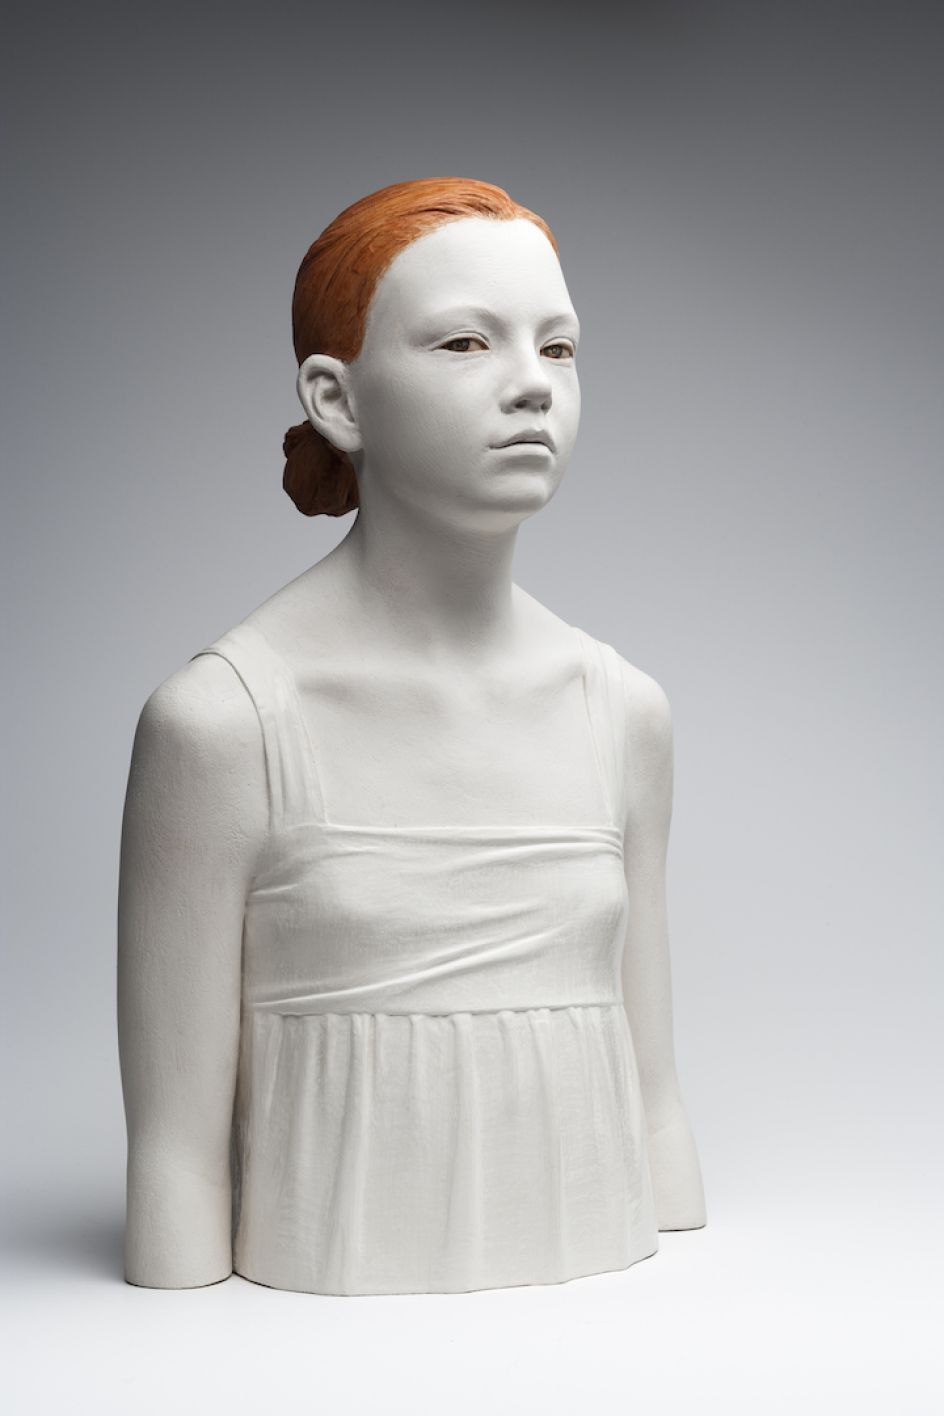 Human sculptures by Bruno Walpoth made entirely from wood | Creative Boom